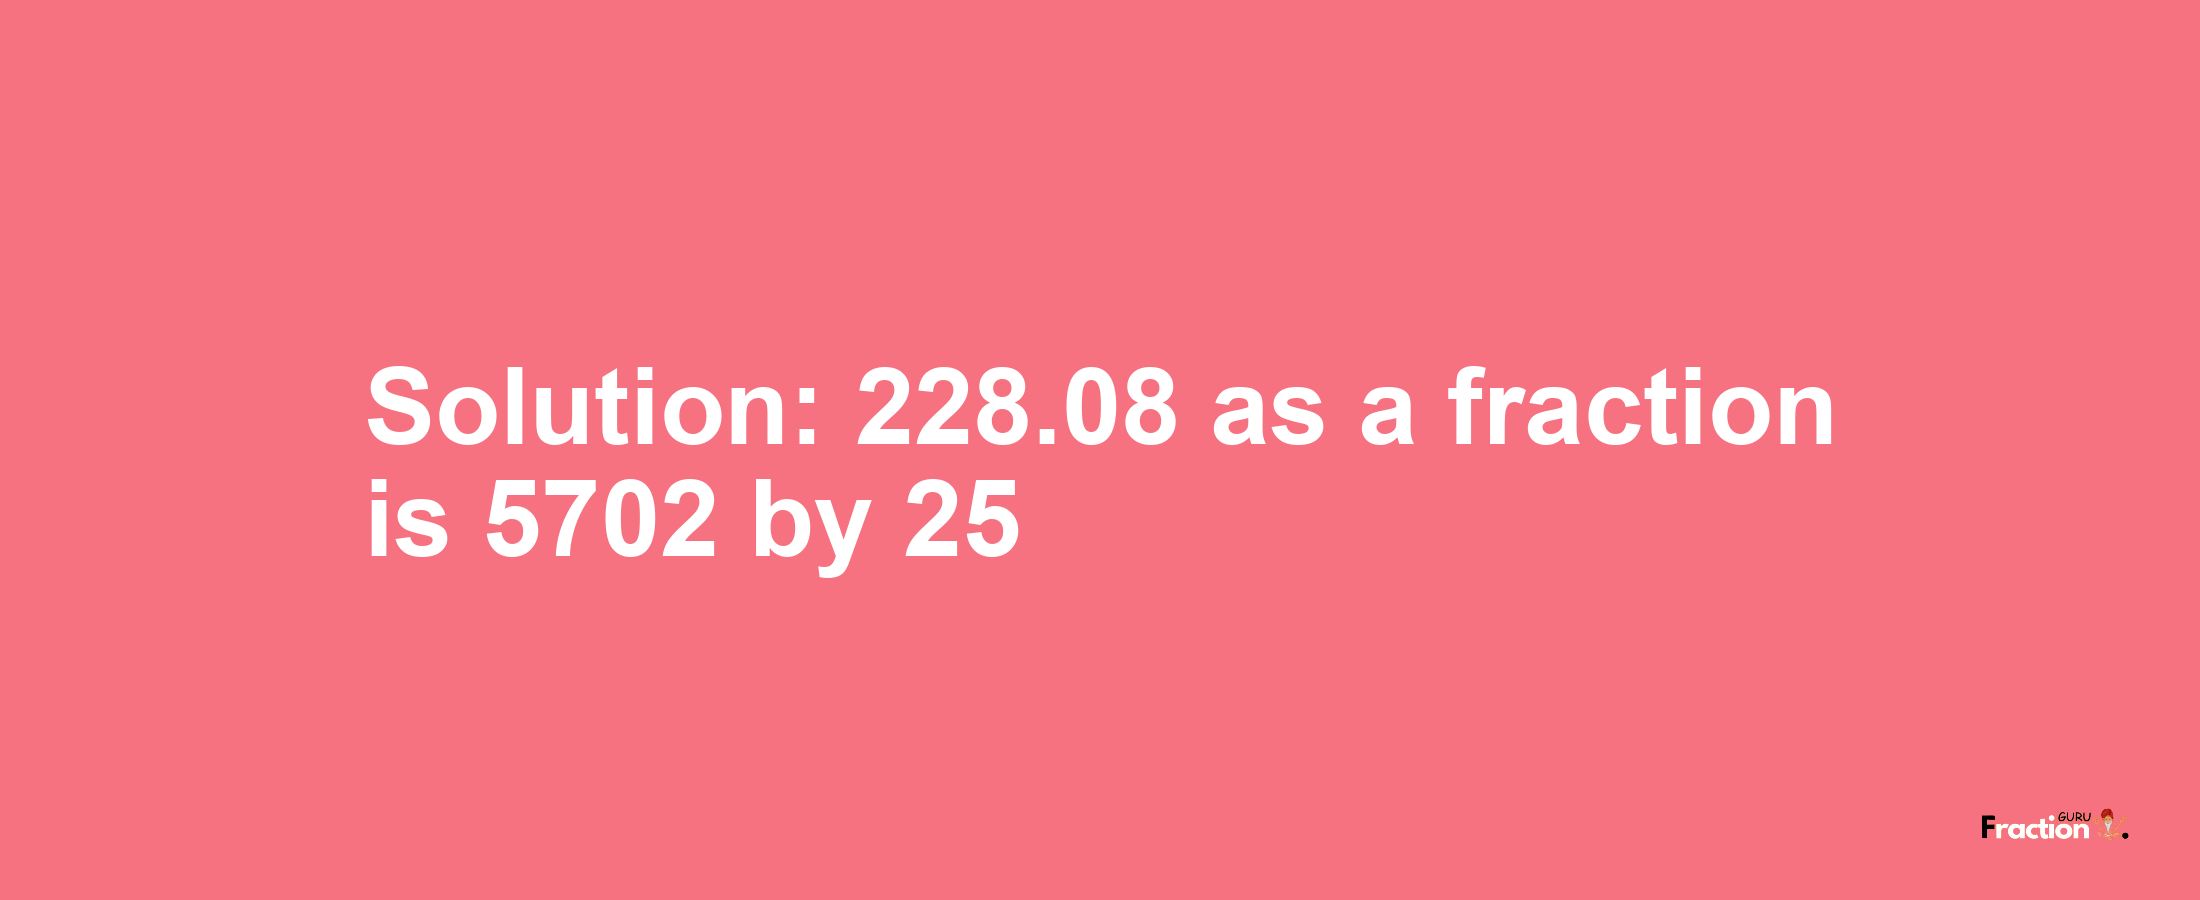 Solution:228.08 as a fraction is 5702/25